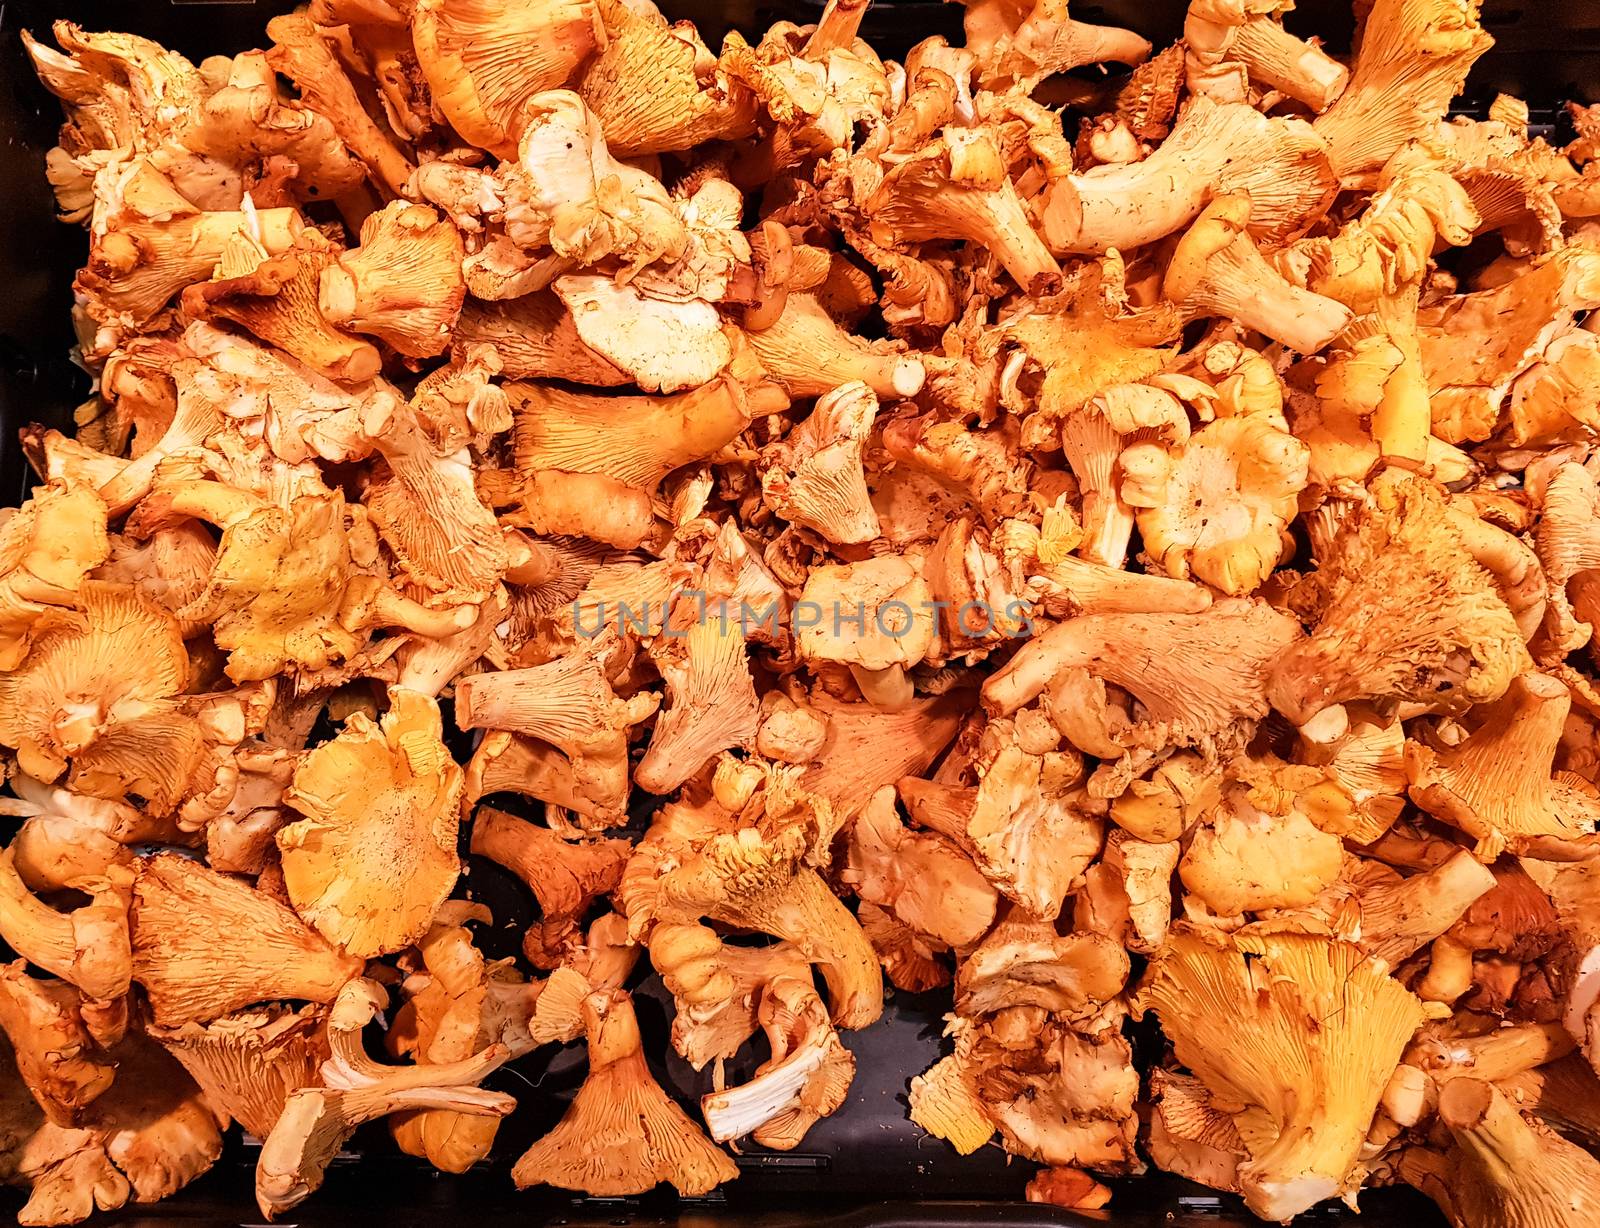 Large selection of edible mushrooms at the market stall